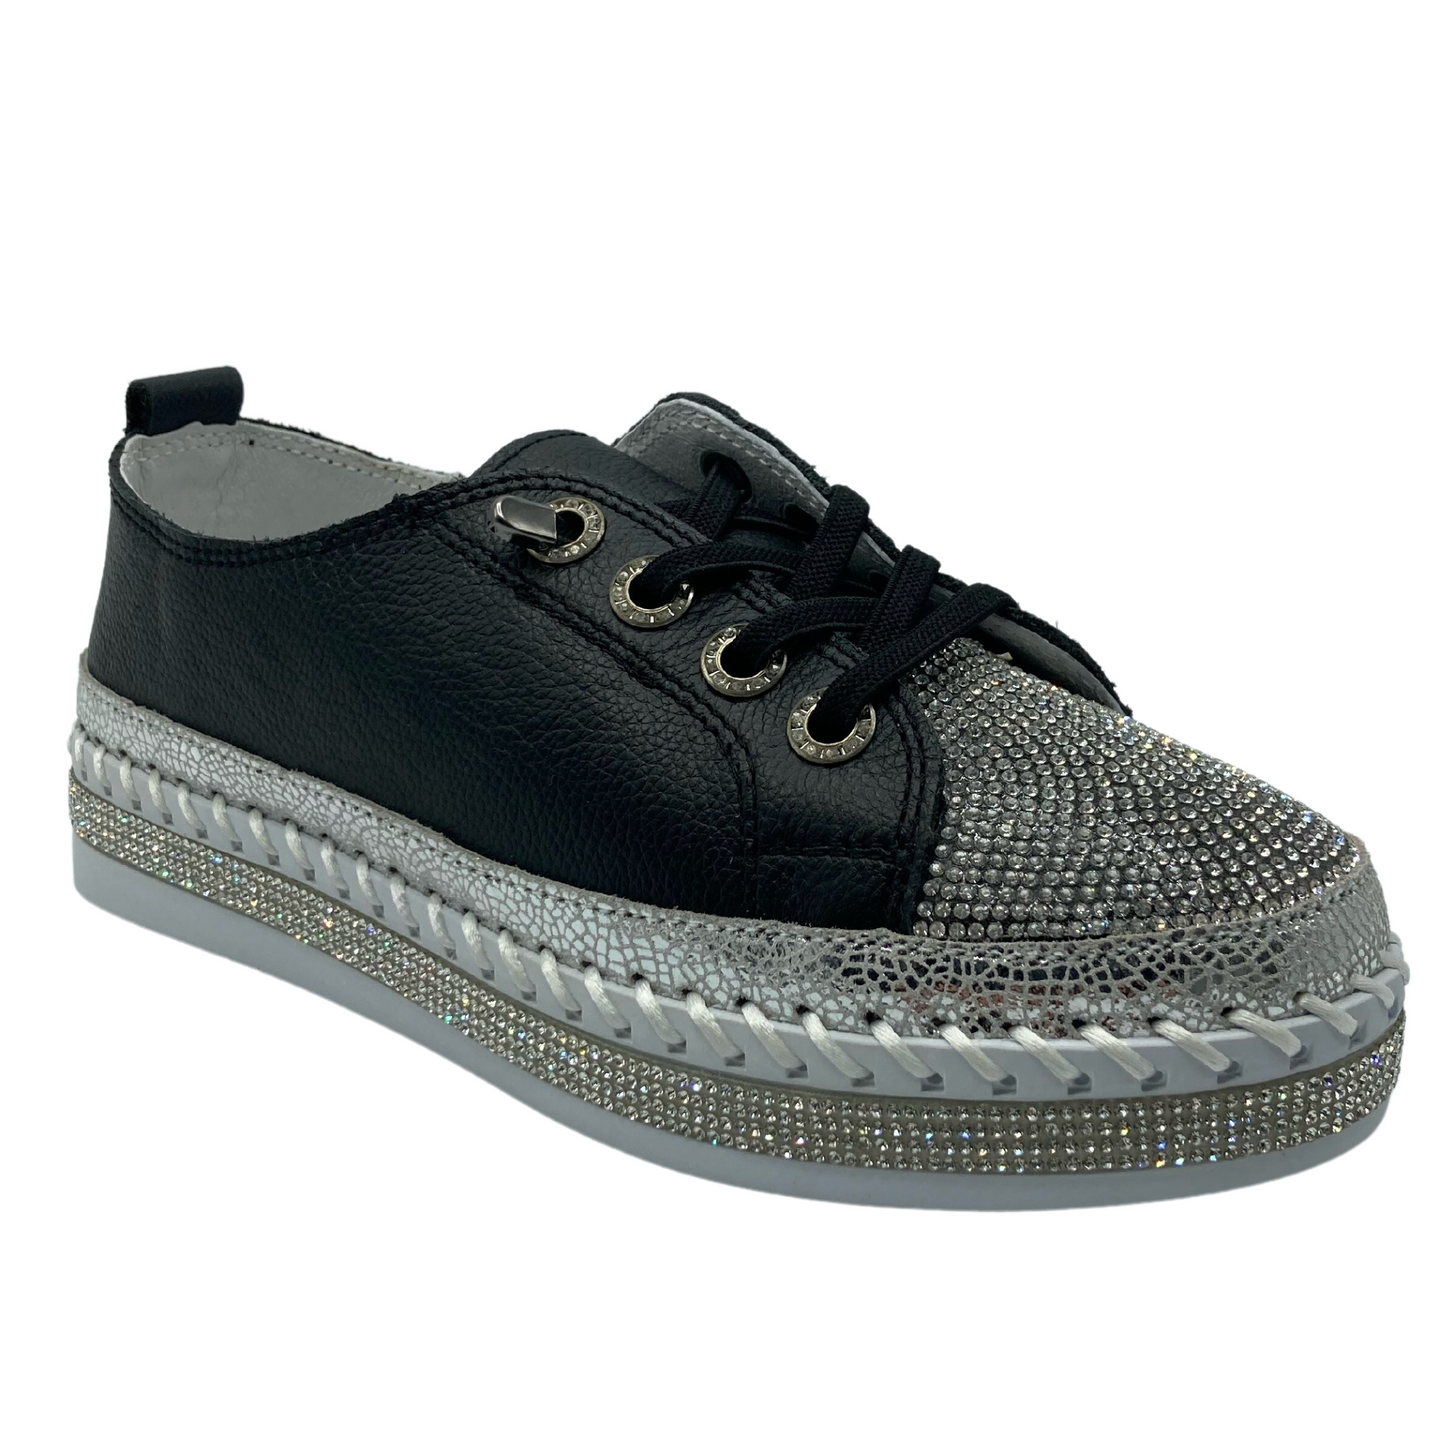 45 degree angled view of bejeweled platform sneaker with leather upper and black laces